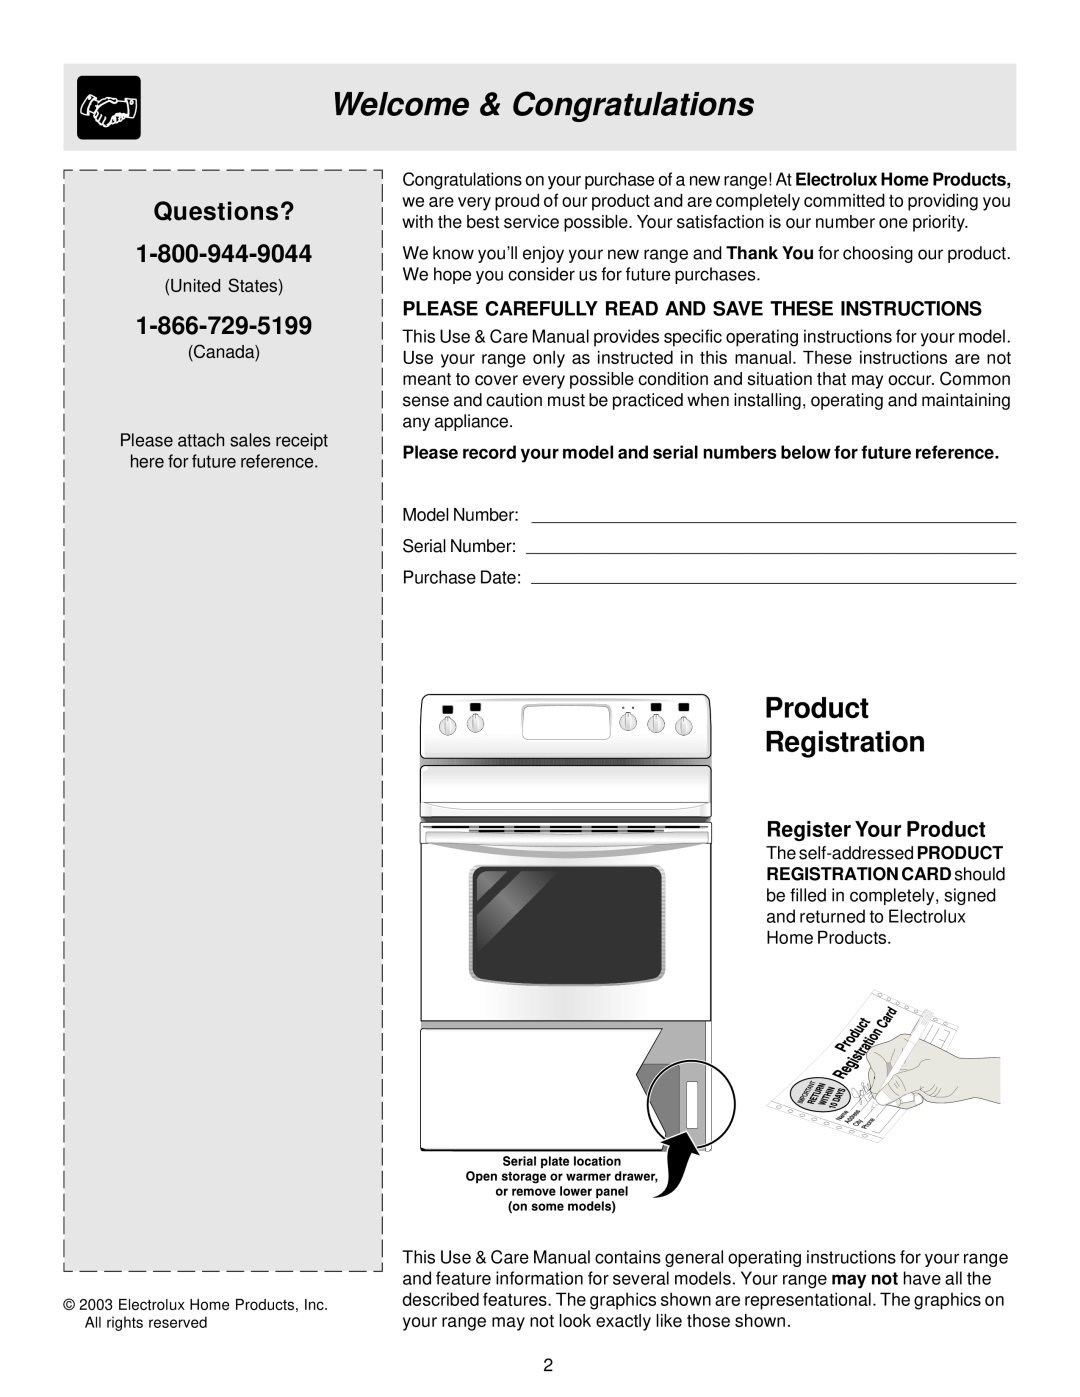 Frigidaire ES40, 316257124 manual Welcome & Congratulations, Register Your Product, Product Registration, Questions? 